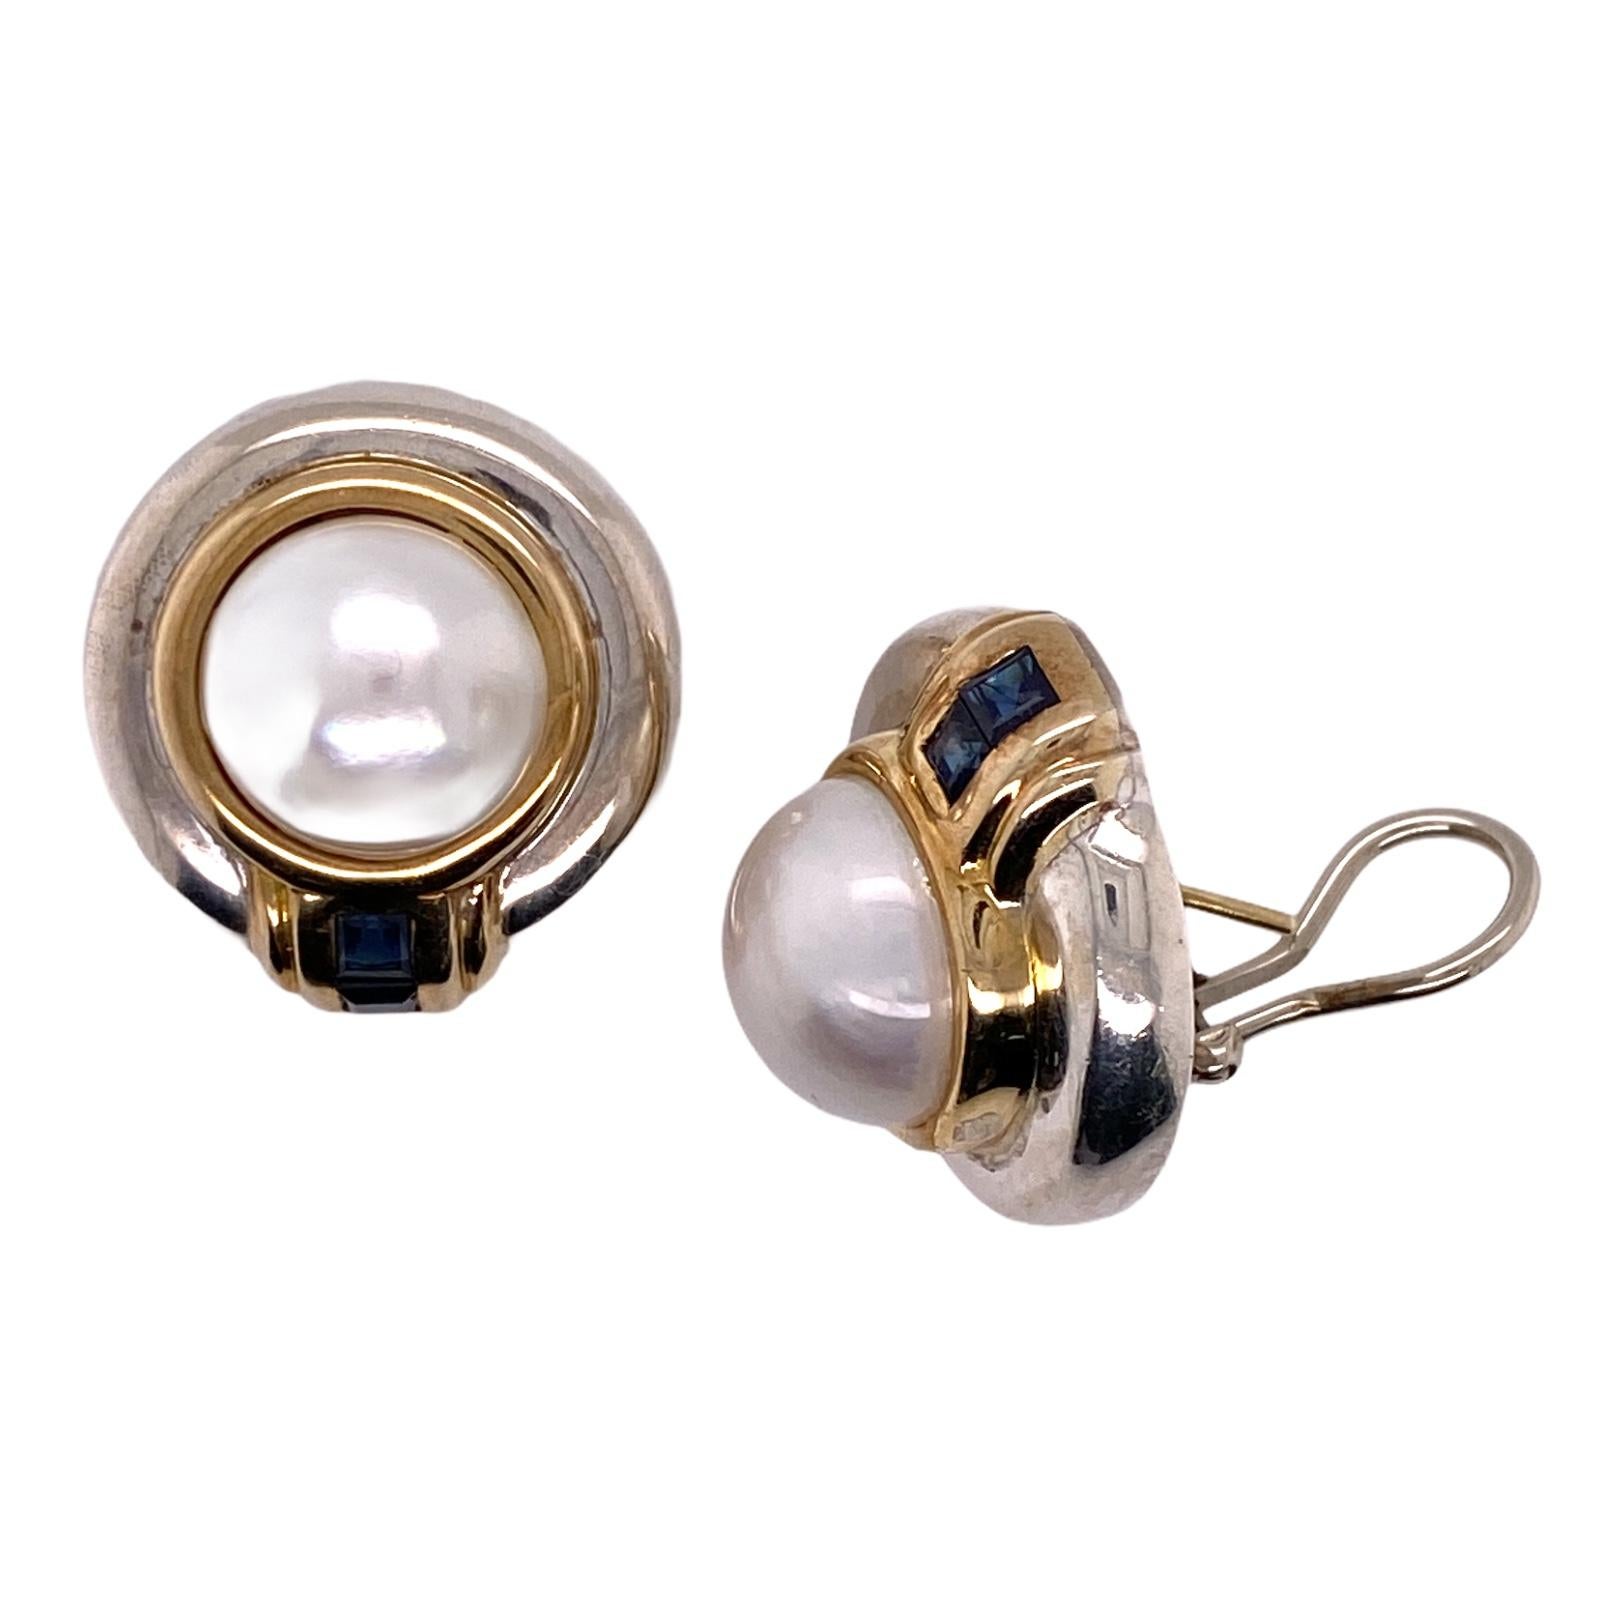 Rare vintage Tiffany & Co. earrings fashioned in 14 karat yellow gold and sterling silver. The earrings feature 12.5mm mabe cultured pearls and 4 princess cut sapphire gemstones. The round earrings measure 22.5mm in diameter, crafted with lever